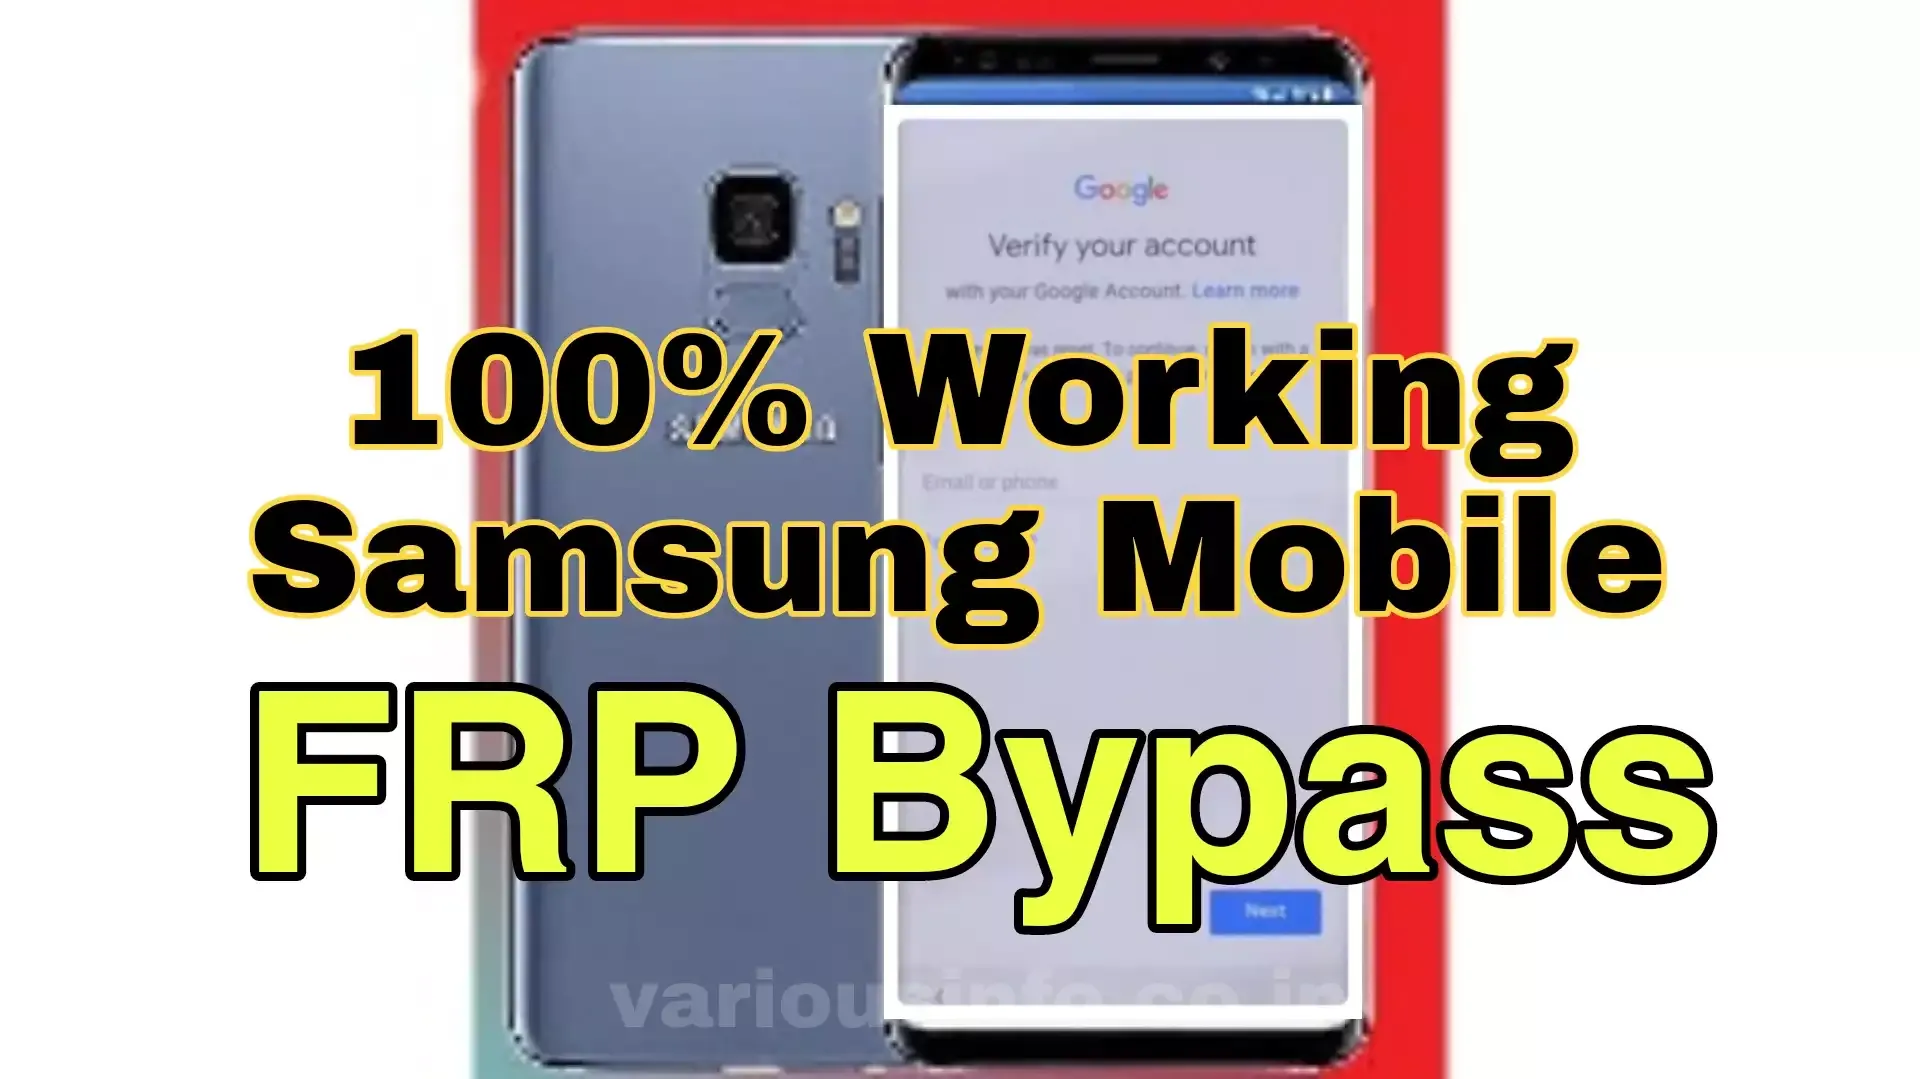 How To Bypass Samsung Smartphone FRP Lock Without PC | google account bypass trick